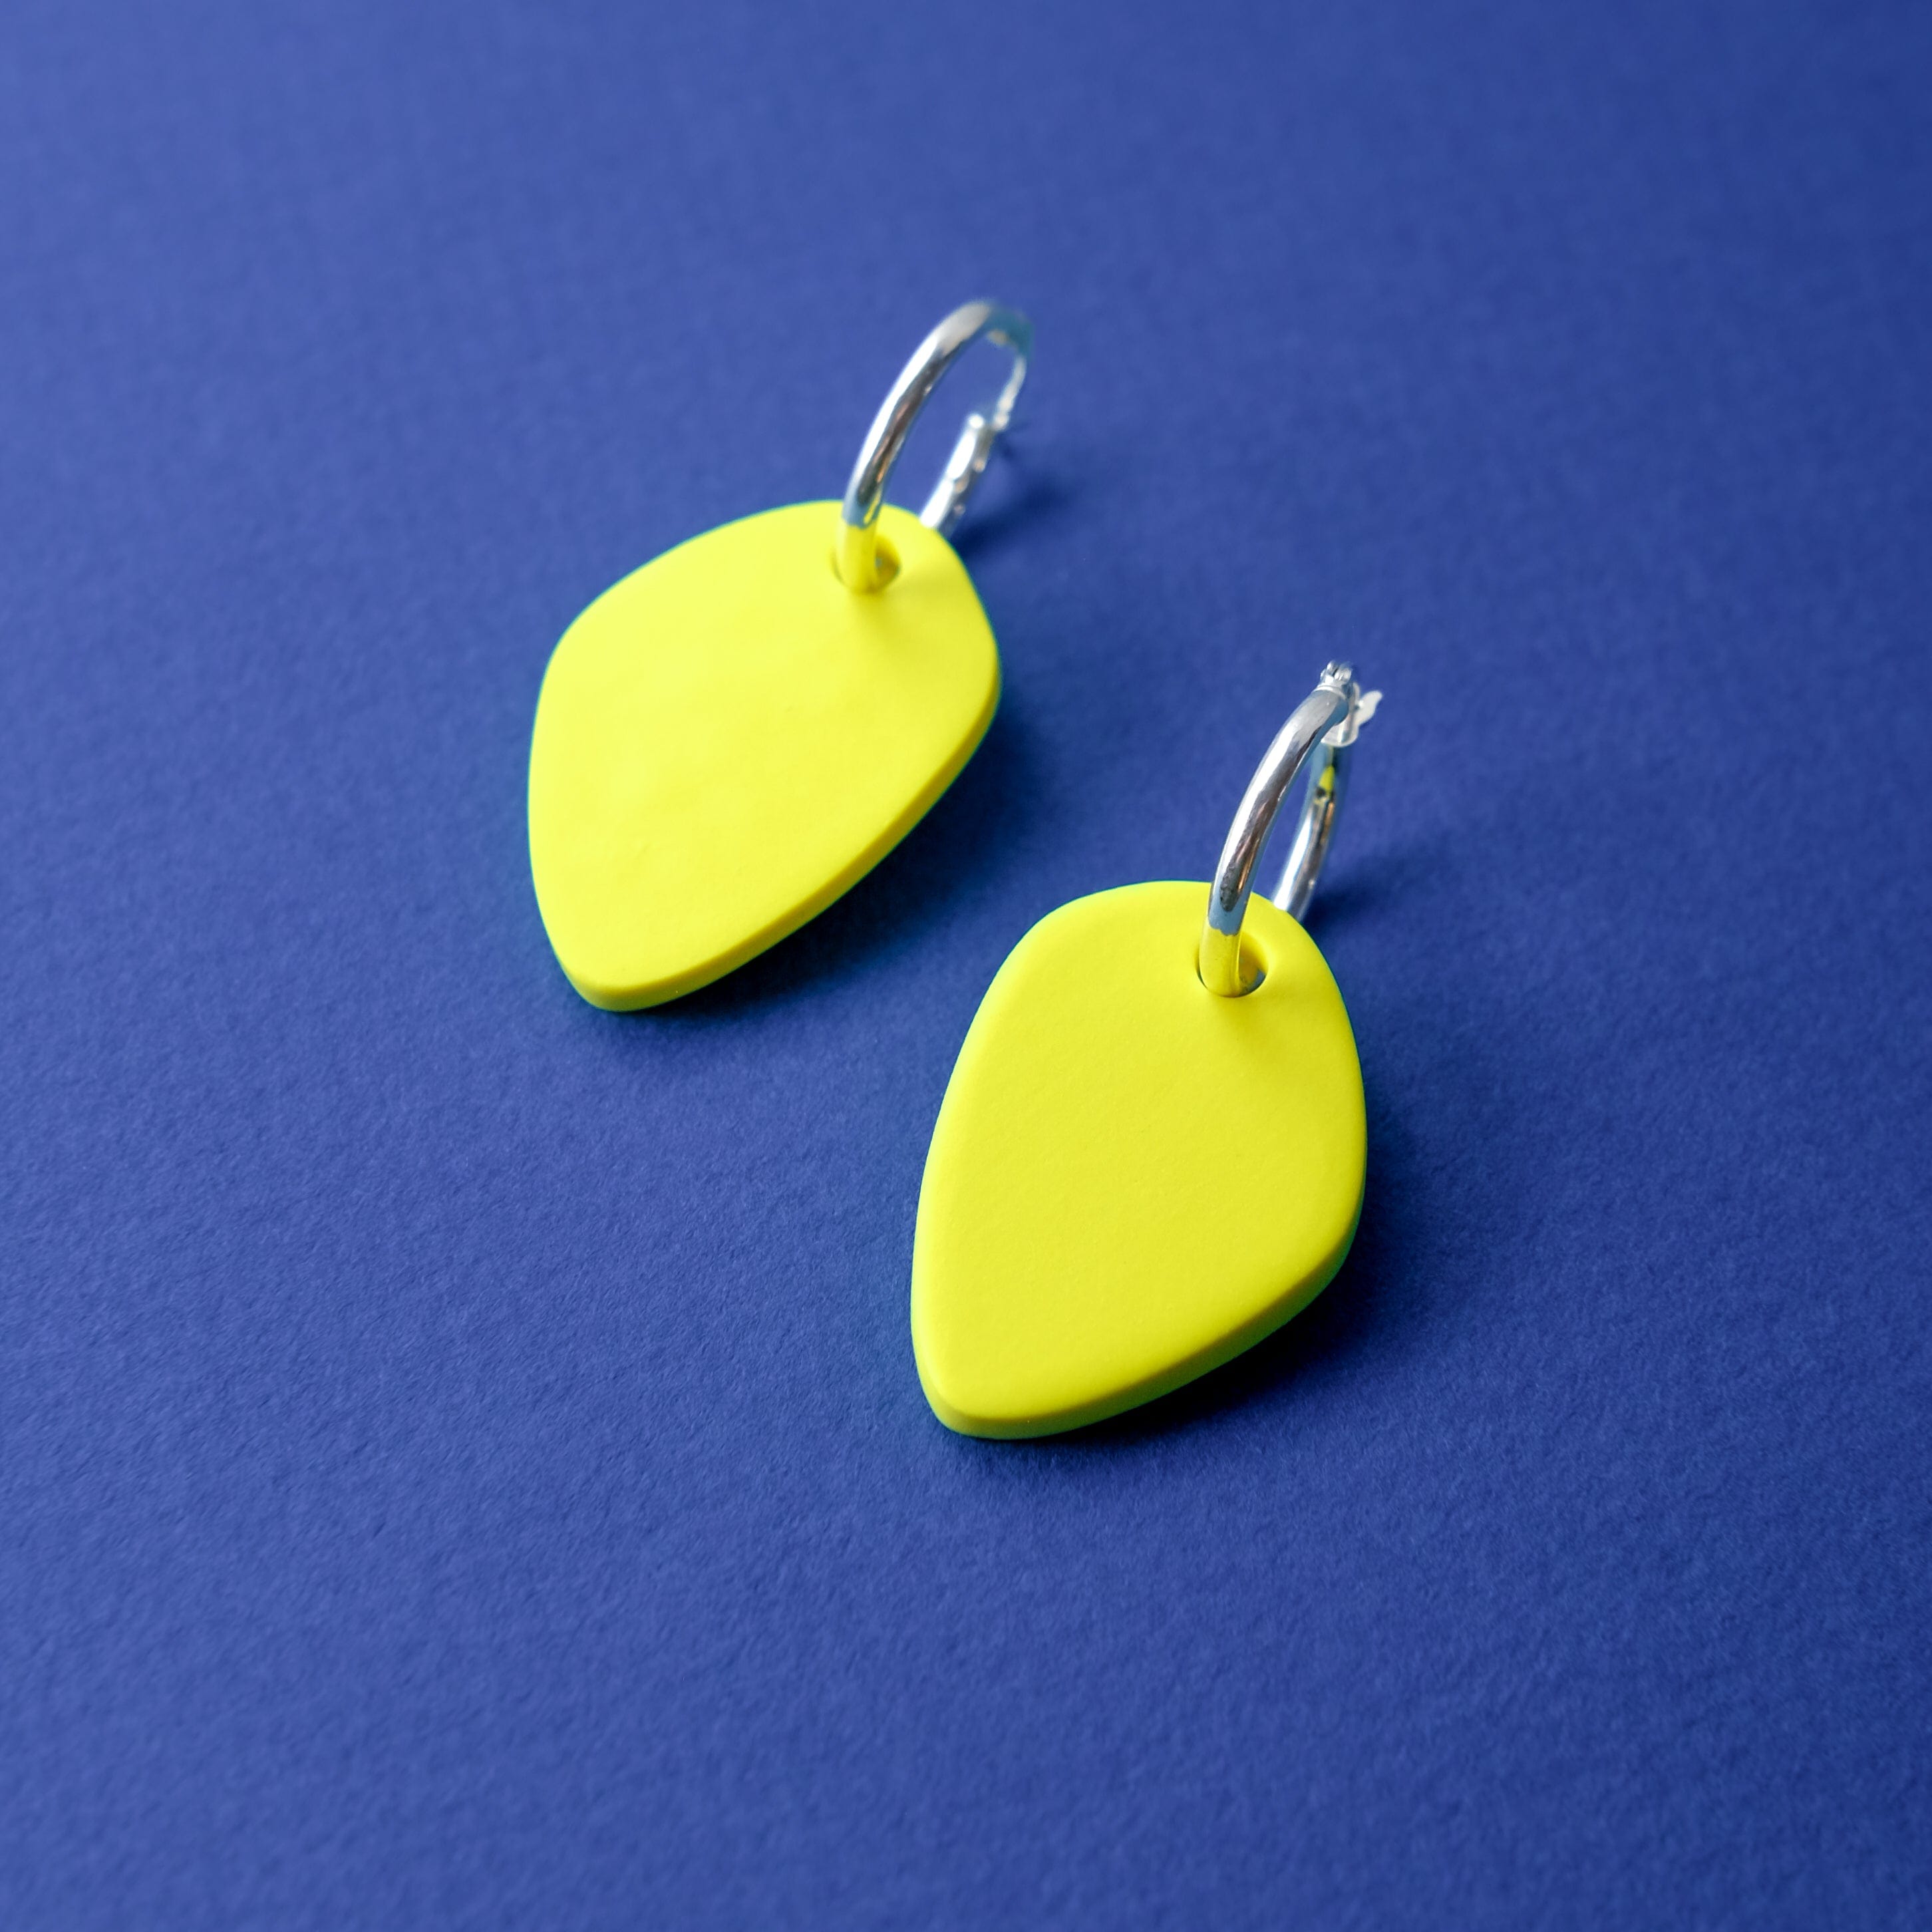 Organic shapes, hoop charm dangly earrings Calder inspired in yellow #color_yellow